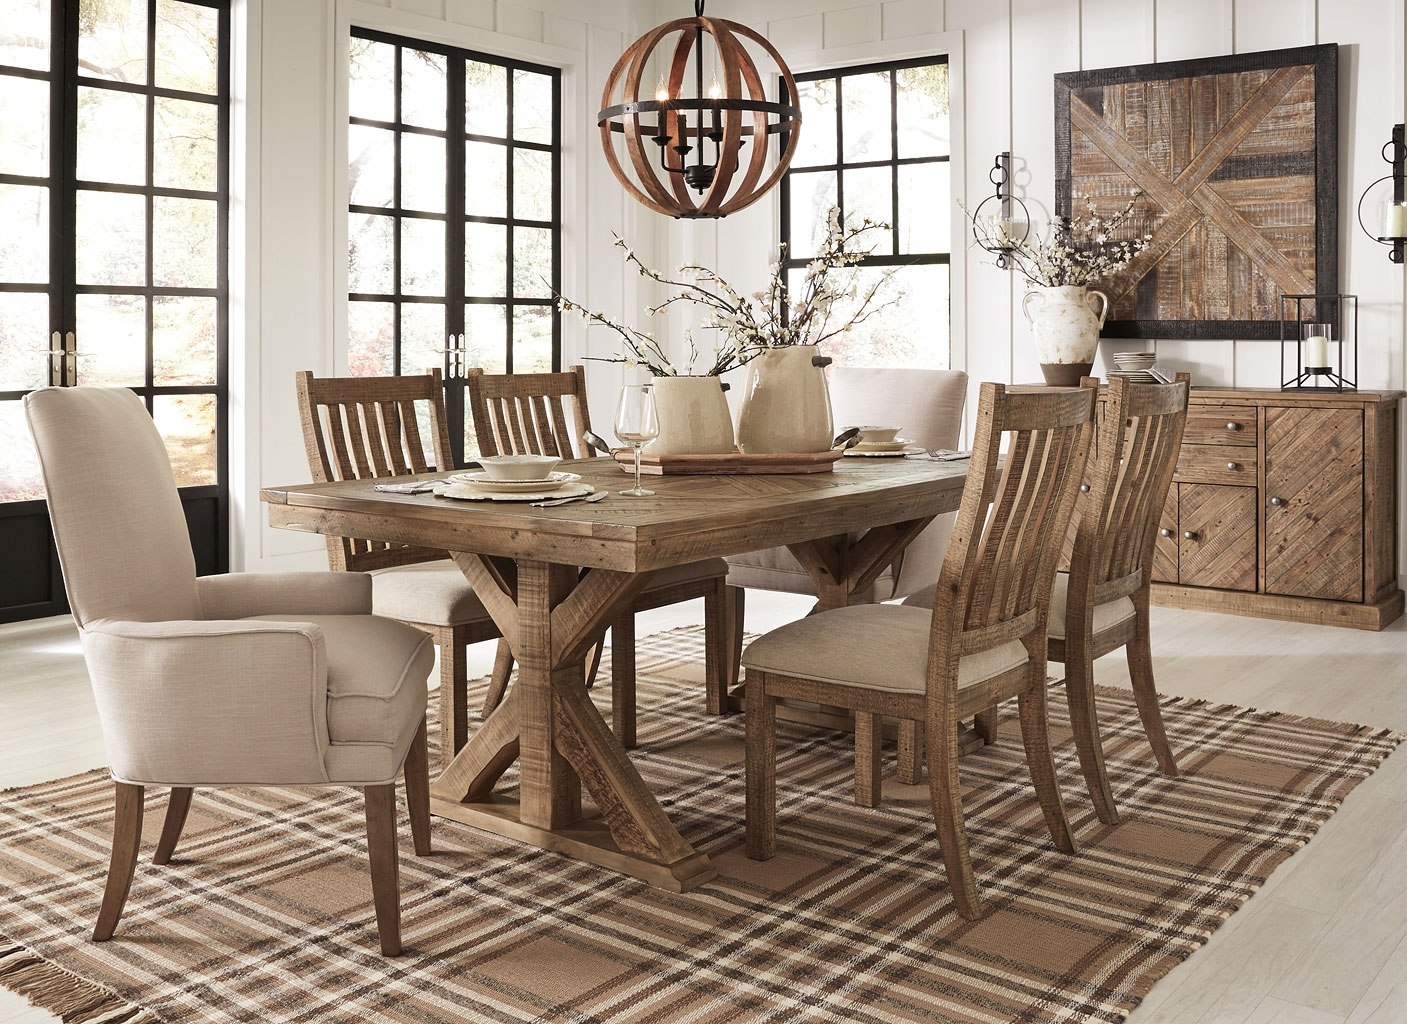 Grindleburg Dining Room Set w/ Light Brown Chairs Signature Design by